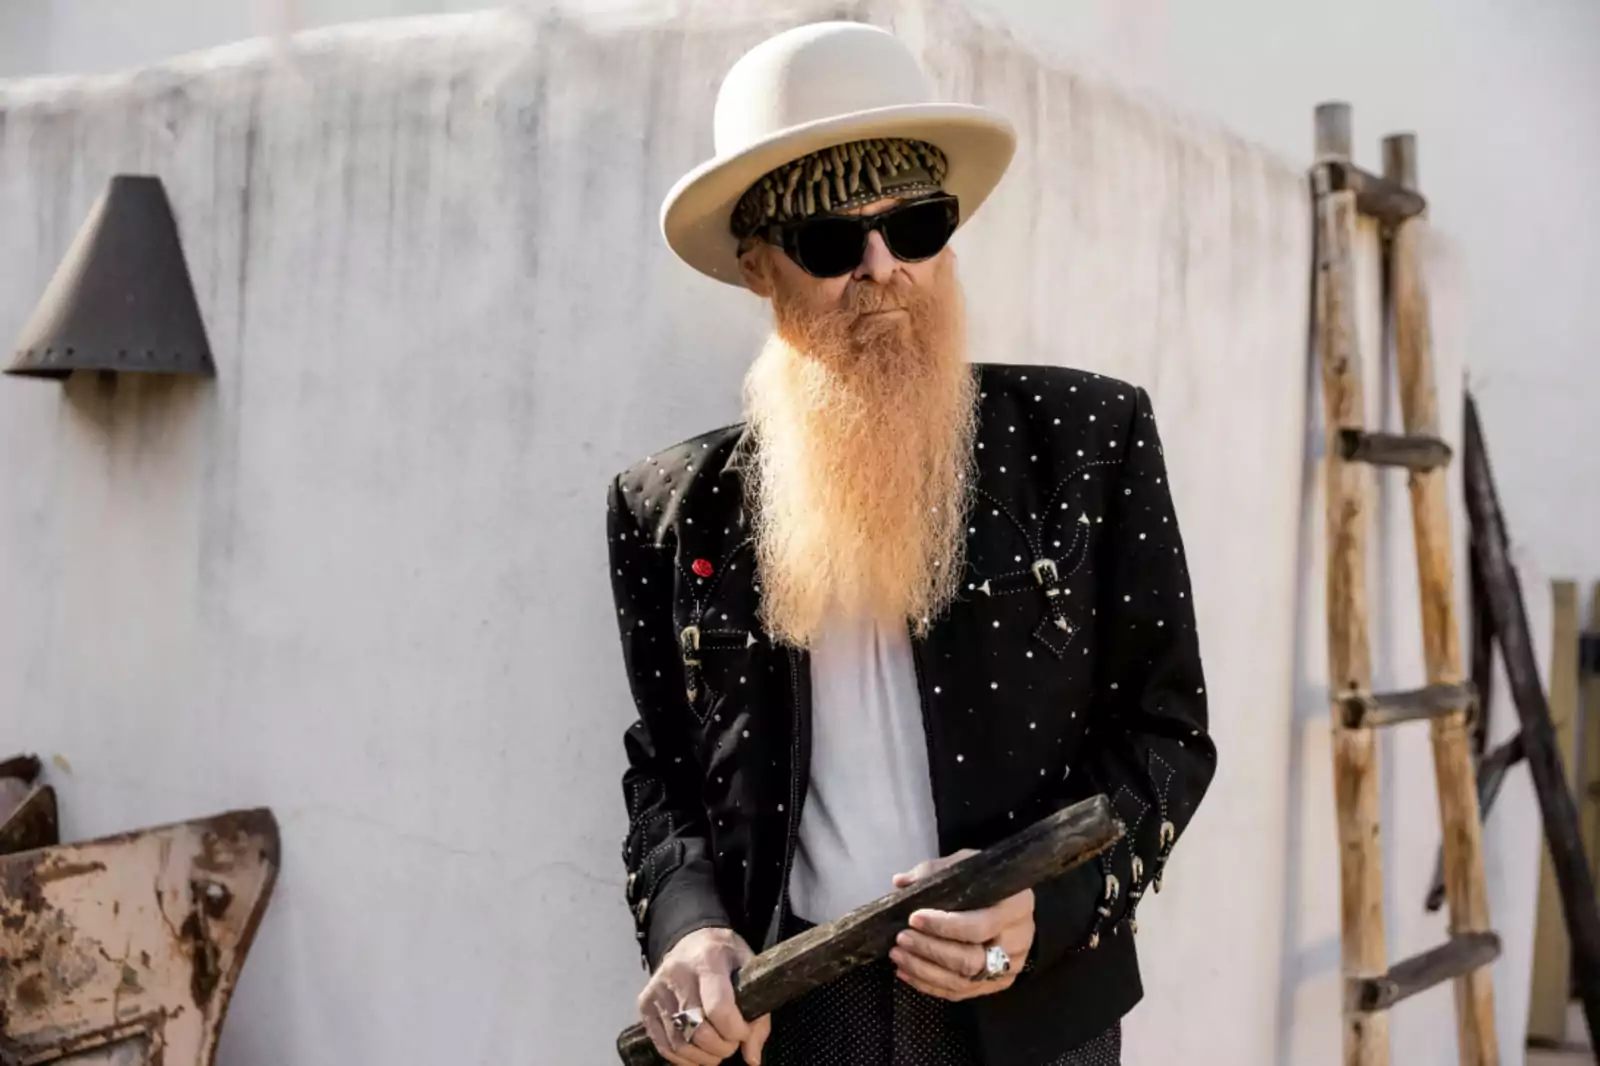 The 10 Songs That ZZ Top's Billy Gibbons Picks His Favorites